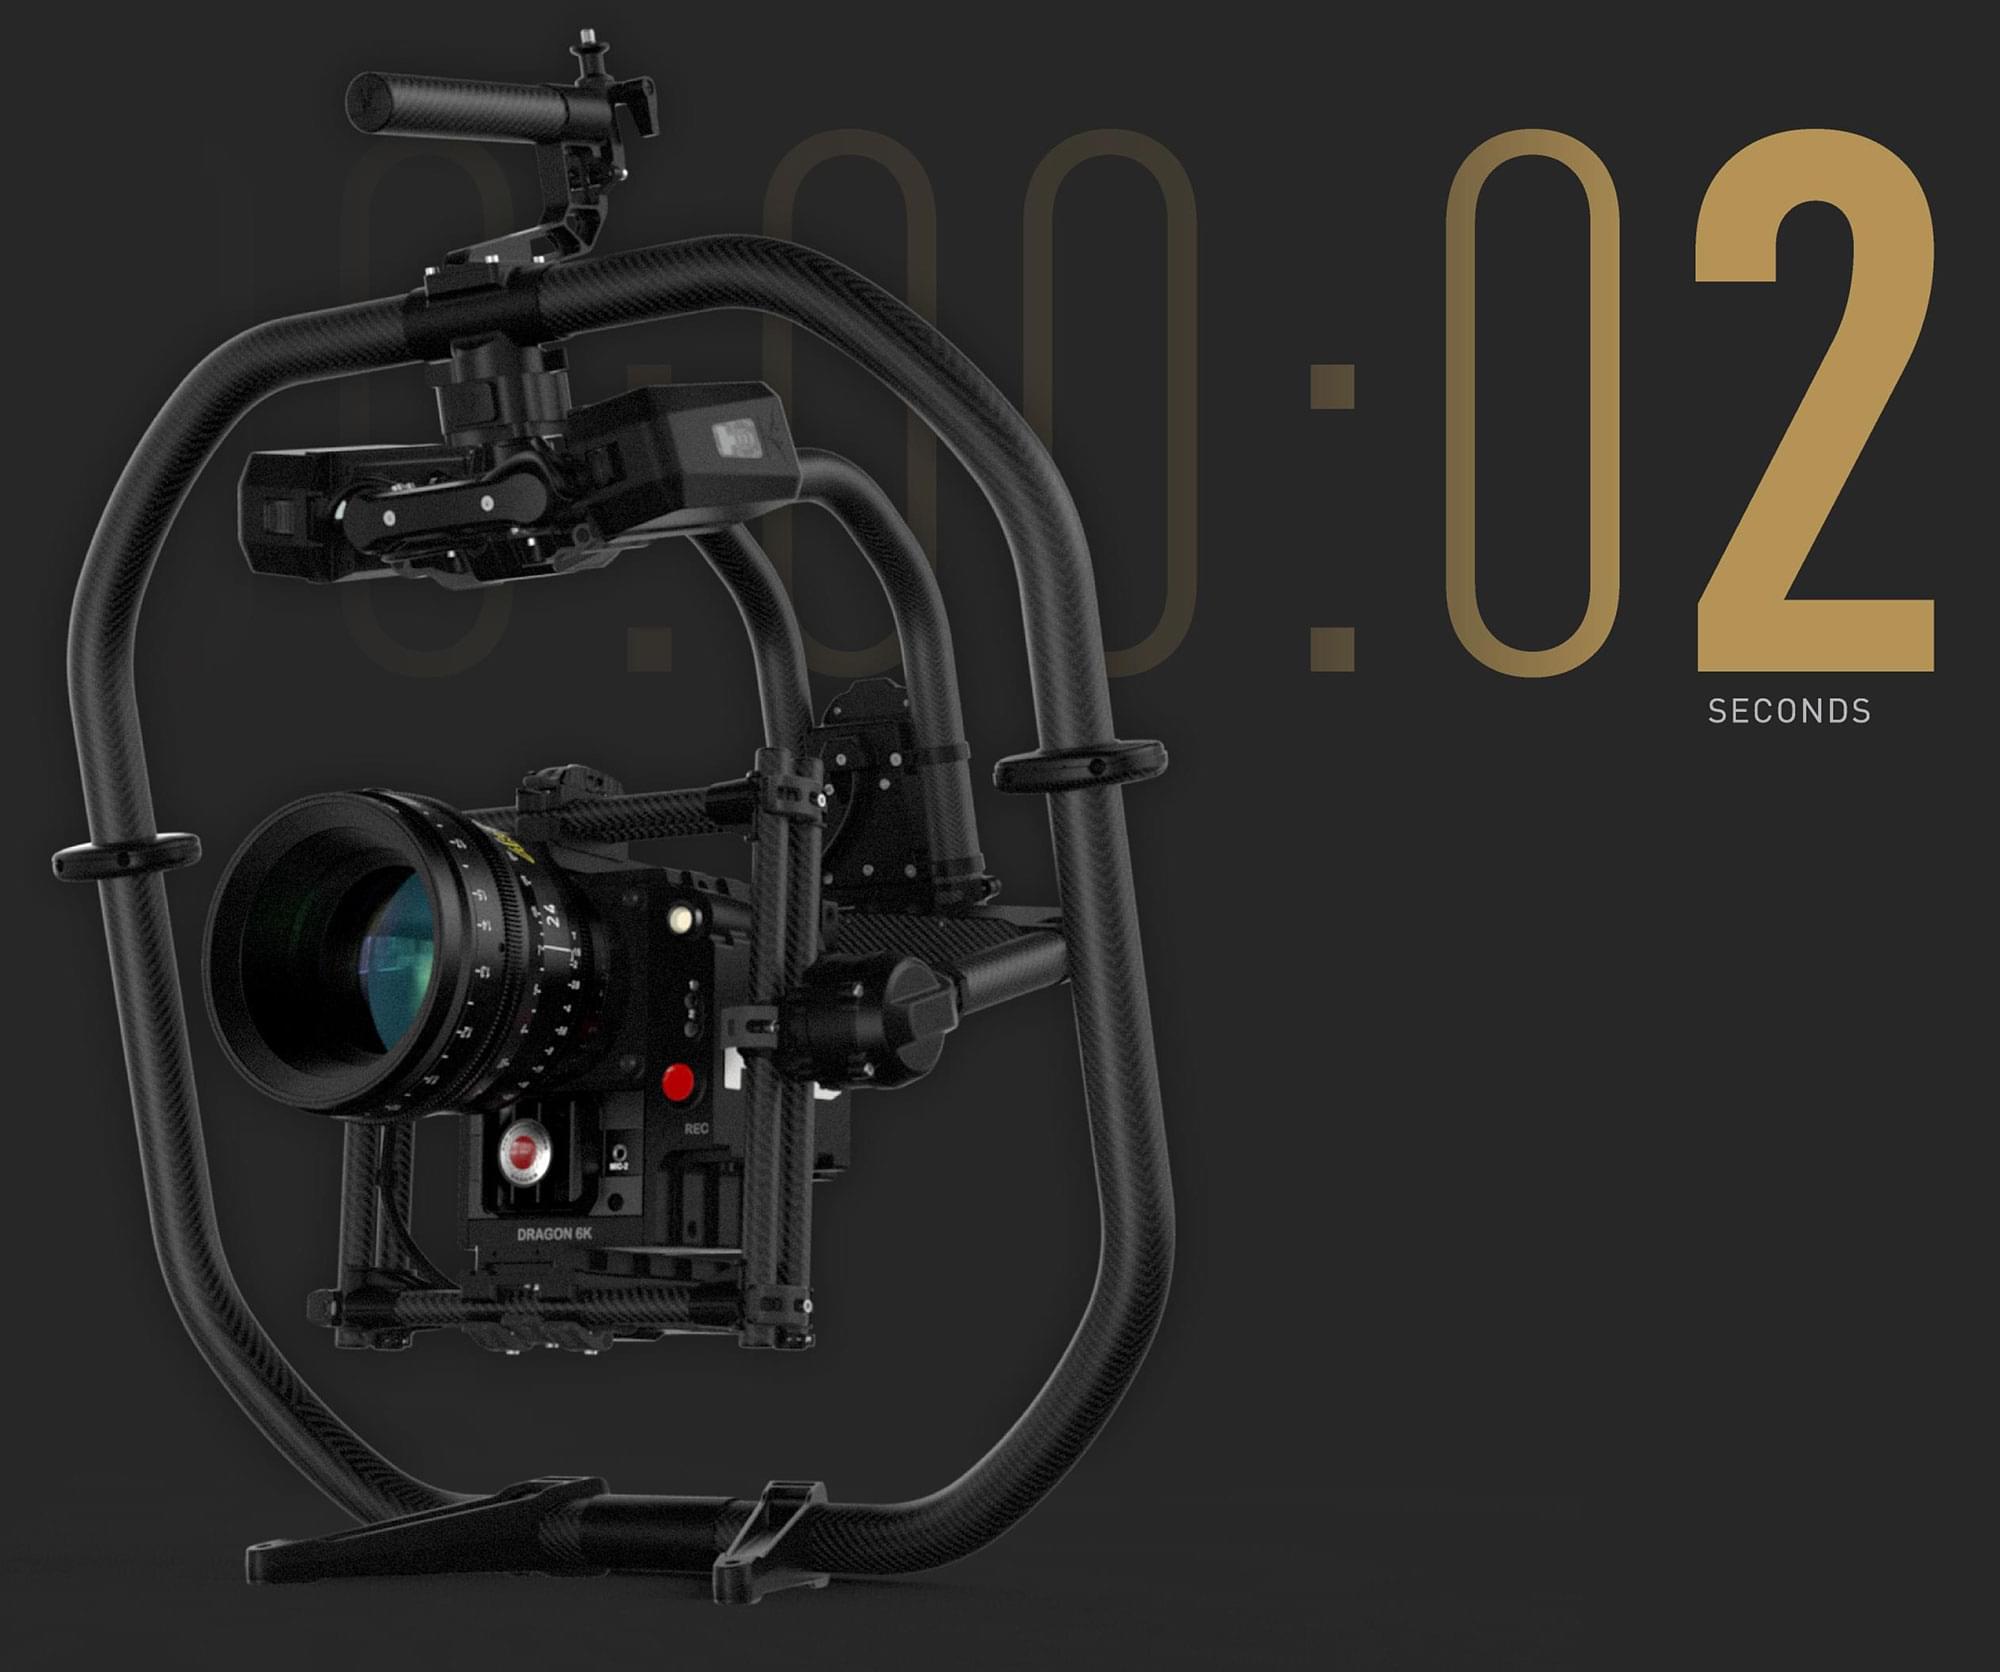 Mōvi Pro has a ~2 second boot time